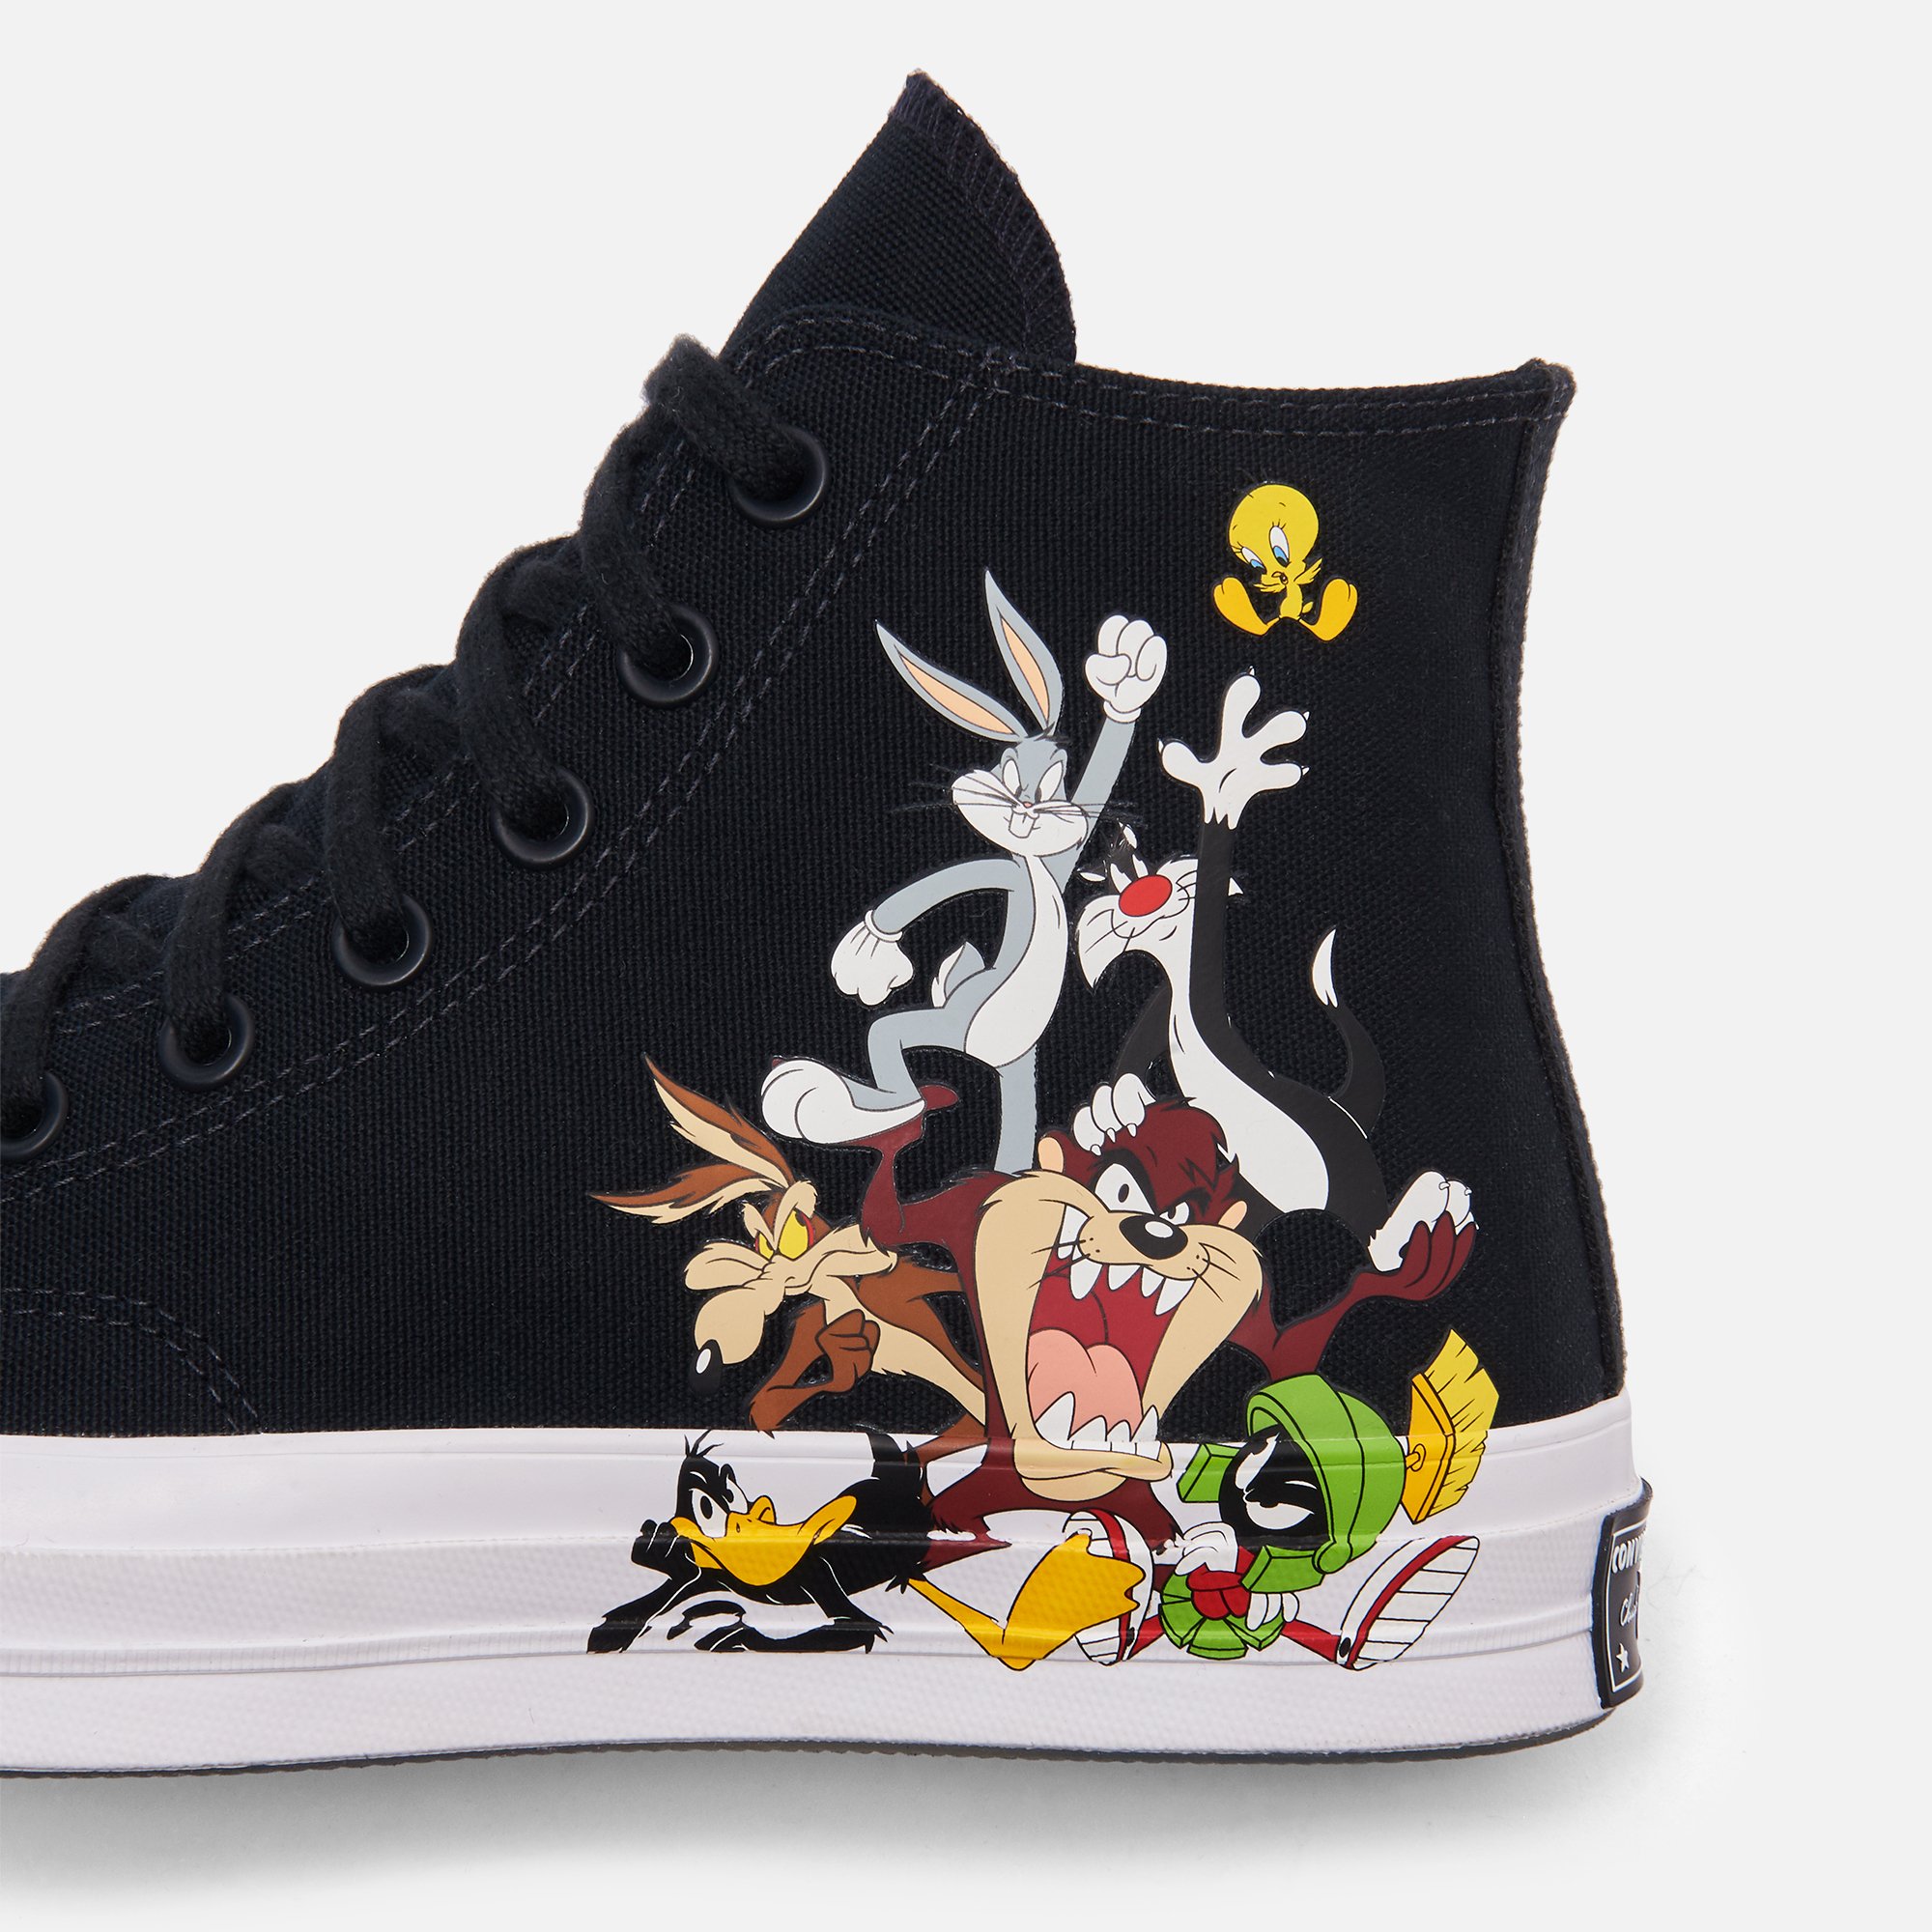 KITH x Looney Tunes x Converse Release Date Announced